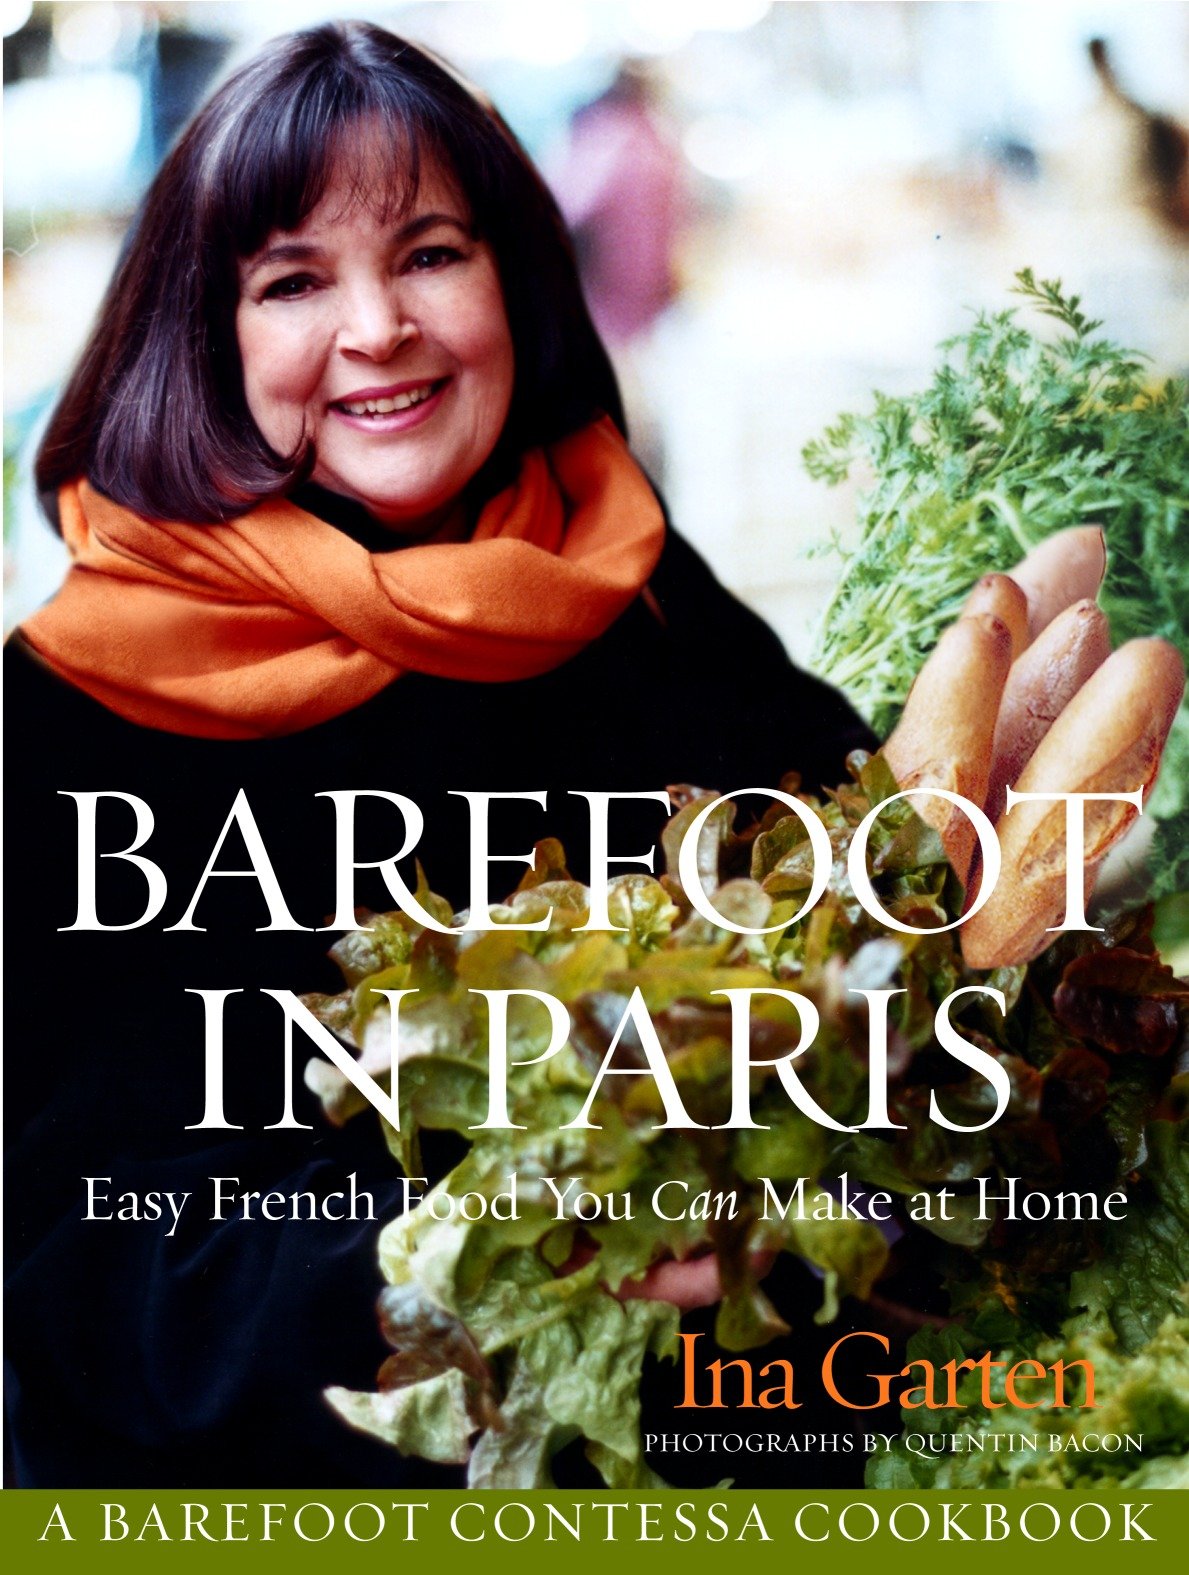 Barefoot in Paris easy French food you can make at home cover image